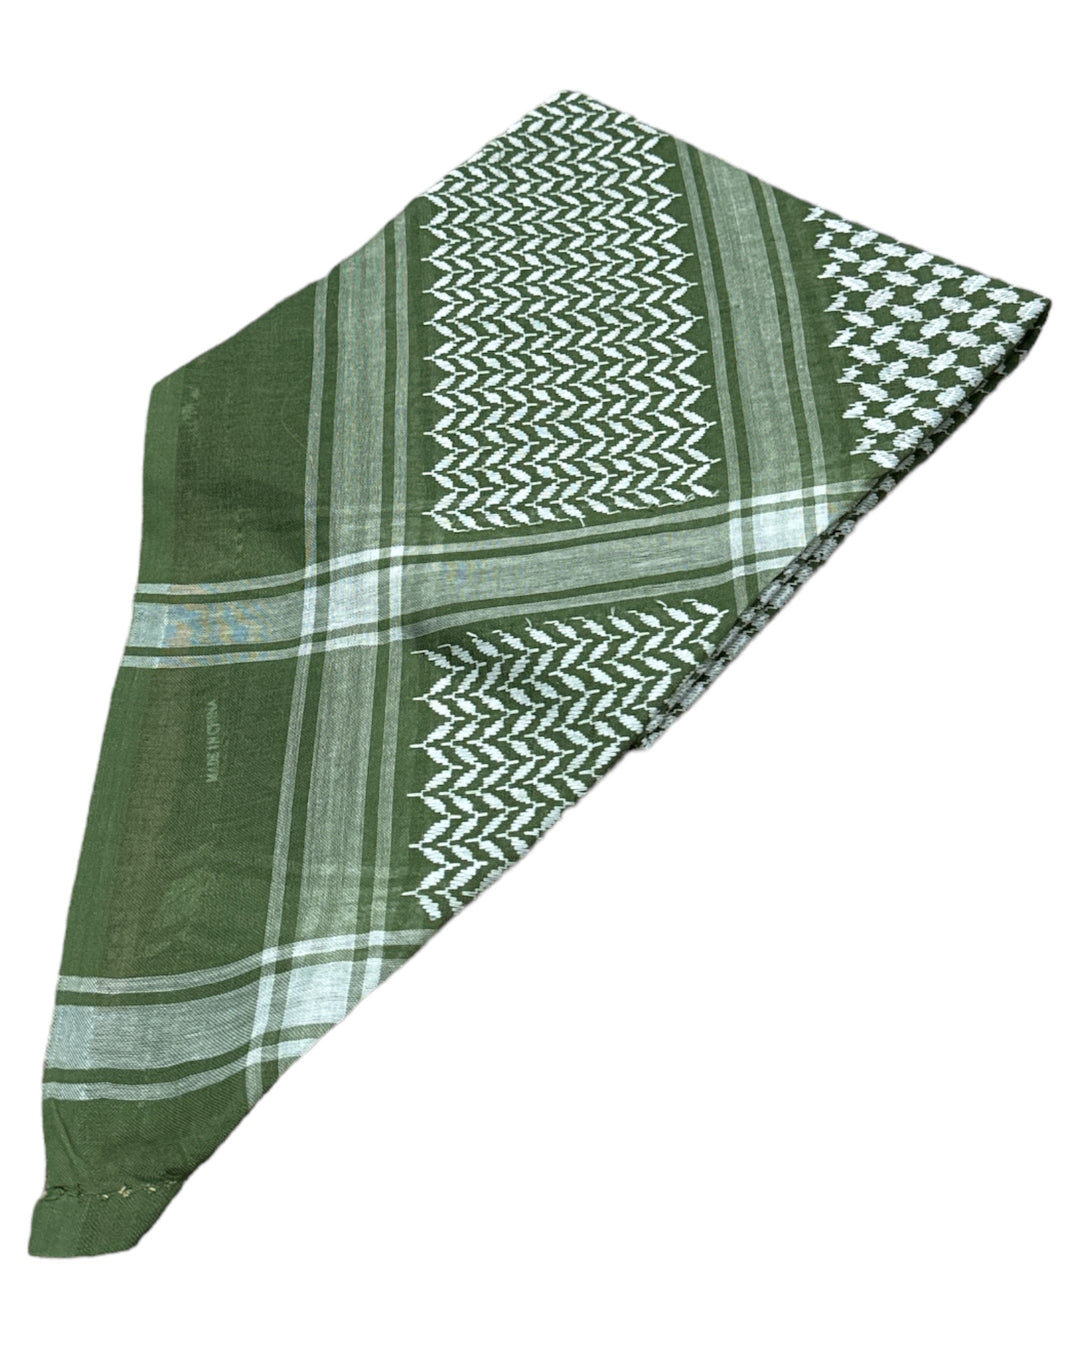 Olive Green & White Keffiyeh Shemagh